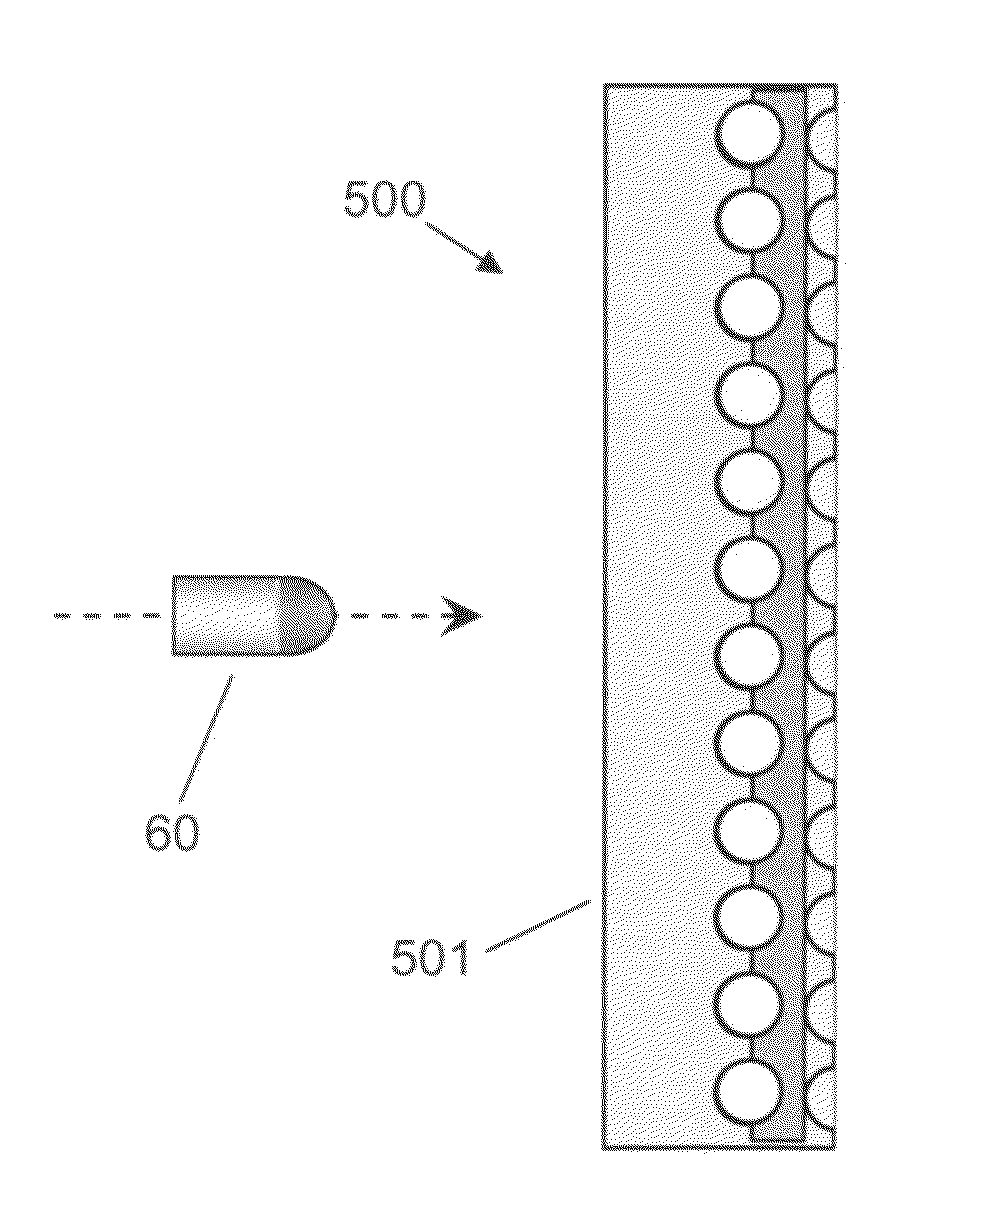 Composite armor having a layered metallic matrix and dually embedded ceramic elements